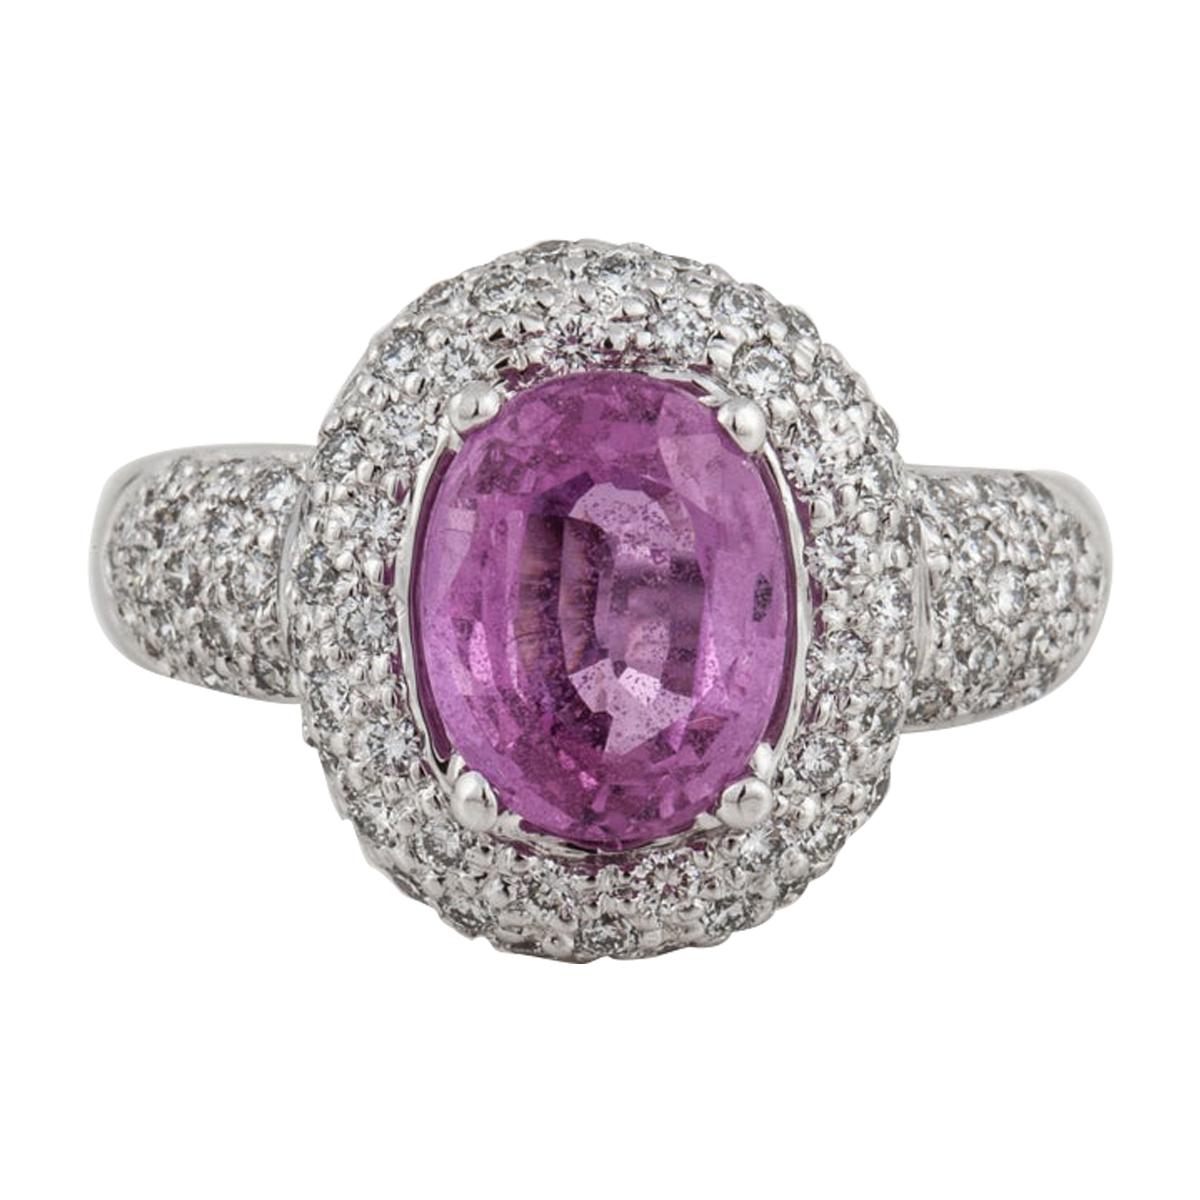 3.03 Ct. Oval Pink Sapphire and Diamond Ring in 18K White Gold